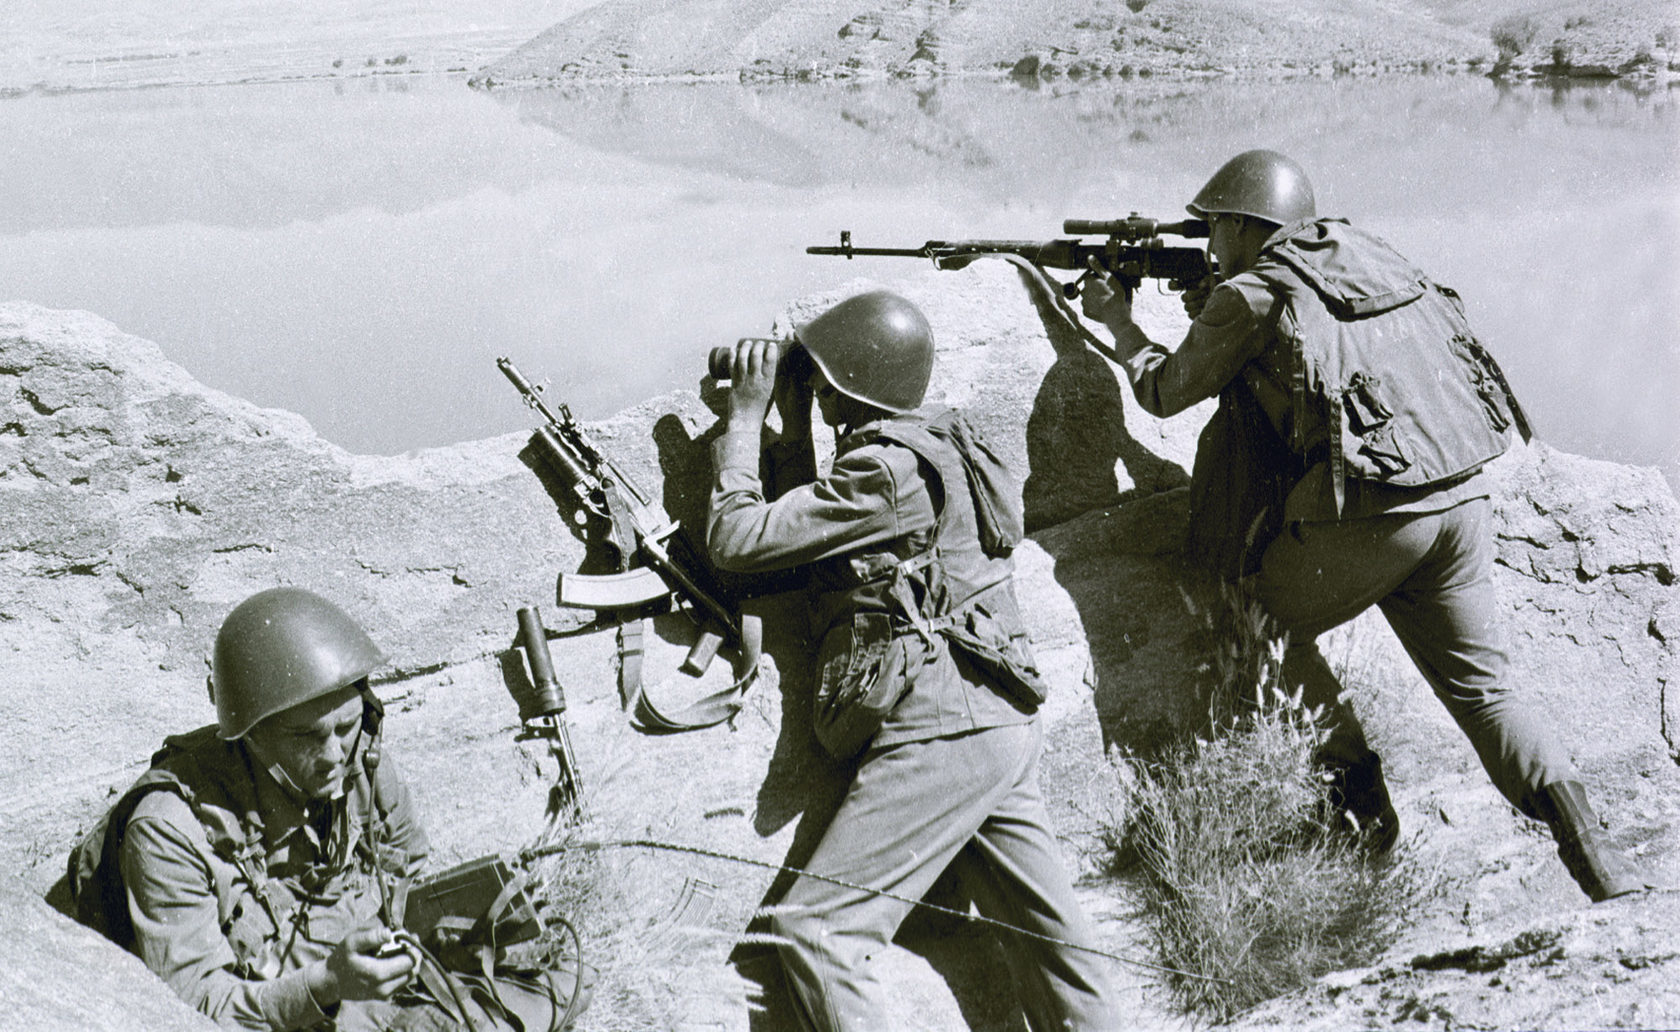 Soviet soldiers observe the highlands, while fighting Islamic guerrillas